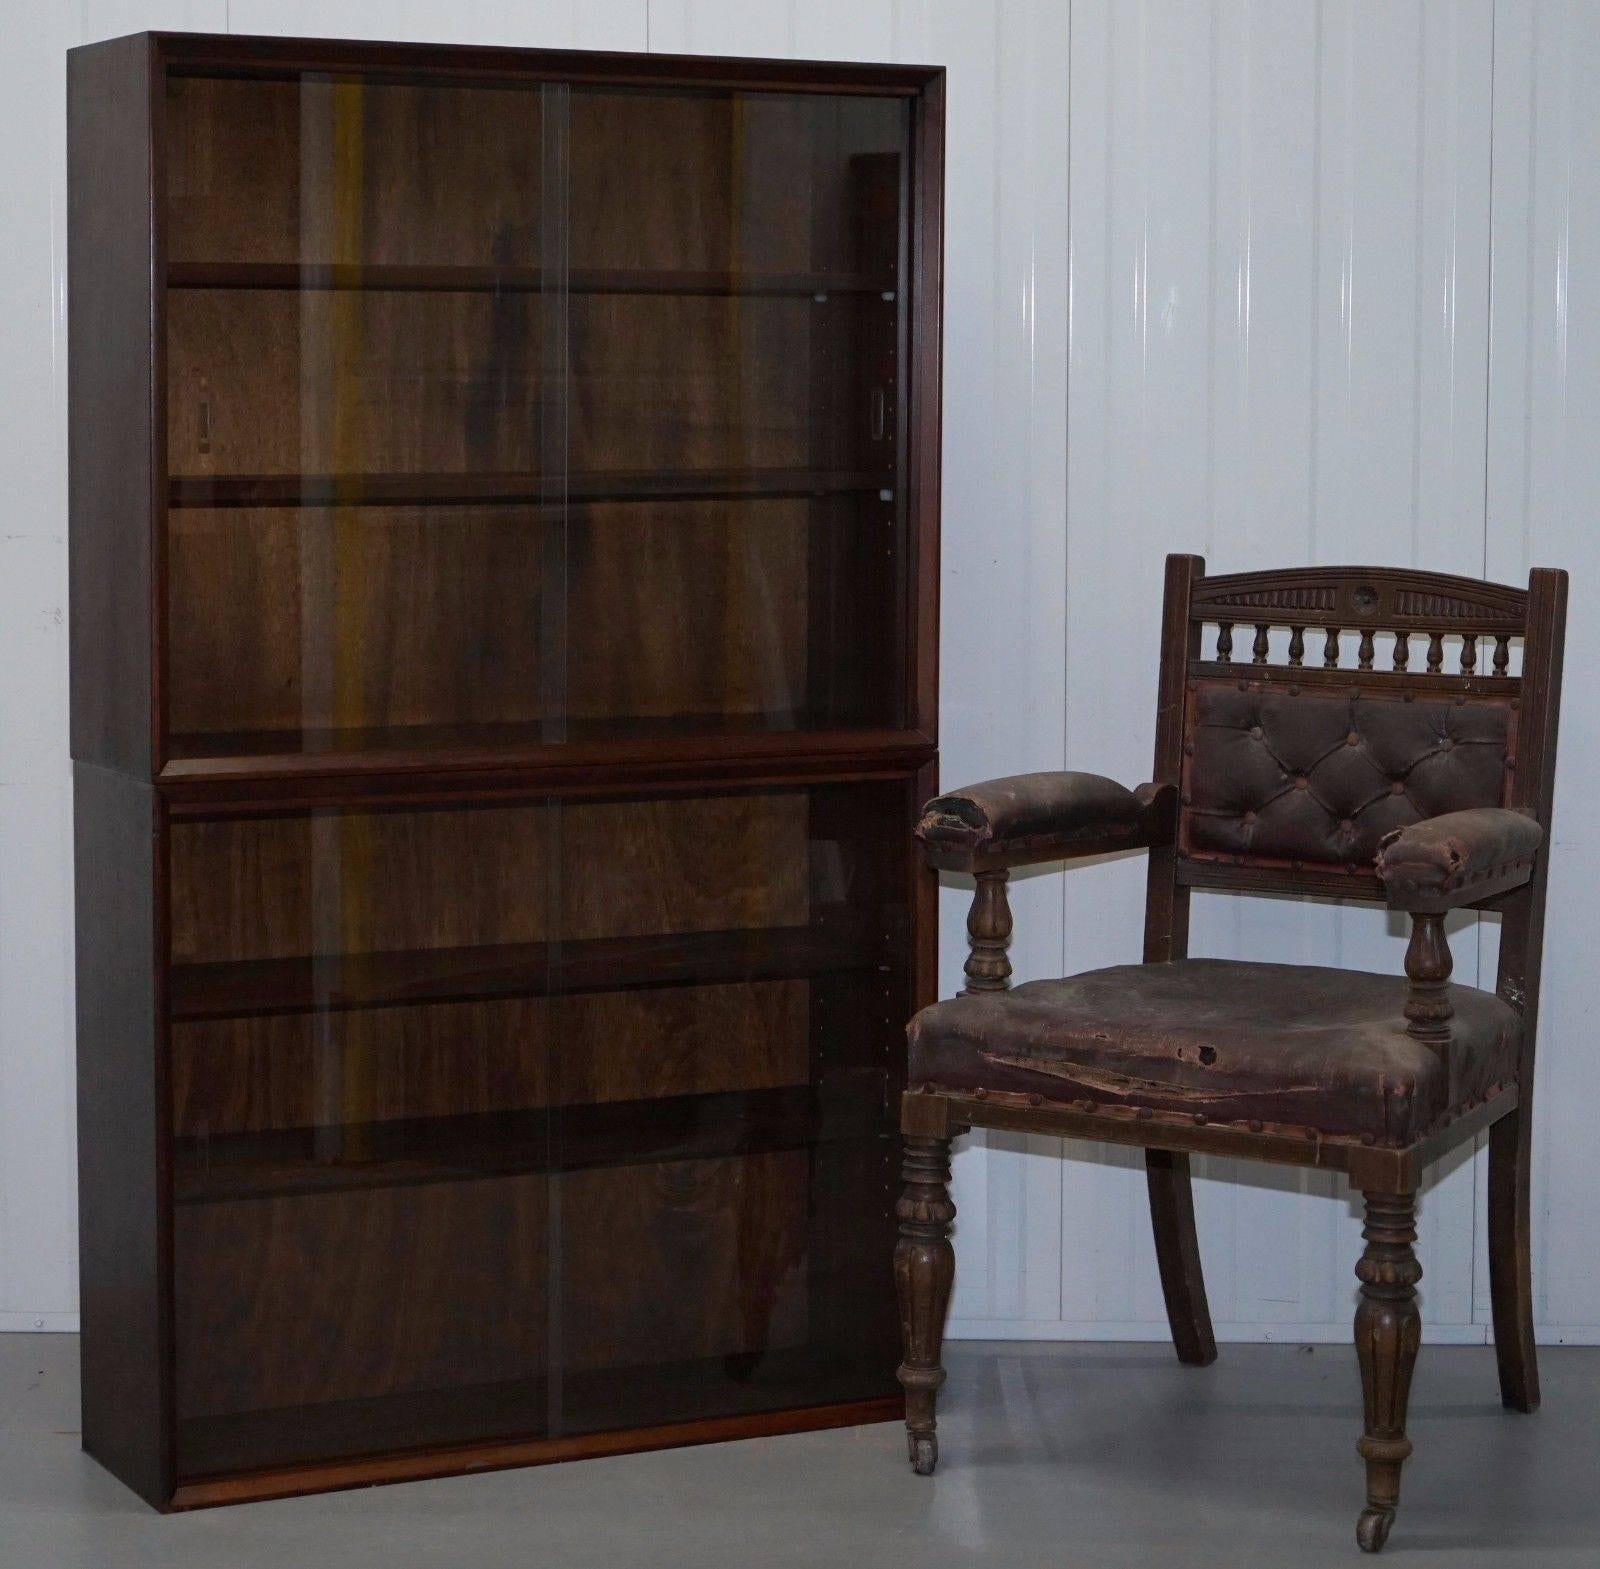 We are delighted to offer for sale this lovely pair of Herbert Gibbs Furniture solid mahogany with glass sliding doors display bookcases

A very functional pair in excellent condition, we have lightly cleaned hand condition waxed and hand polished